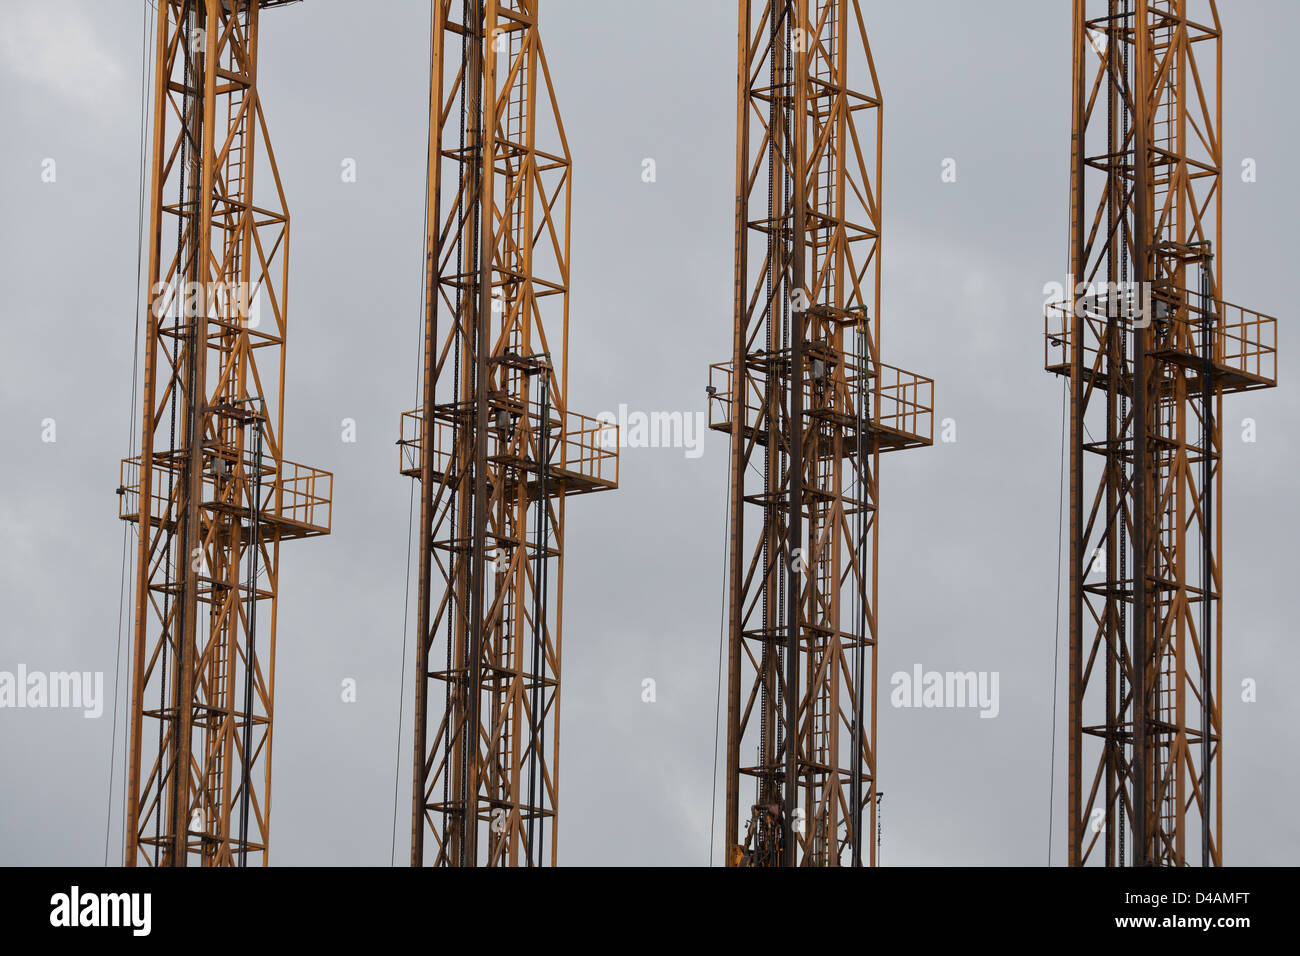 Drill towers on a floating drill rig in Lago Gatun, Panama canal, Republic of Panama. Stock Photo